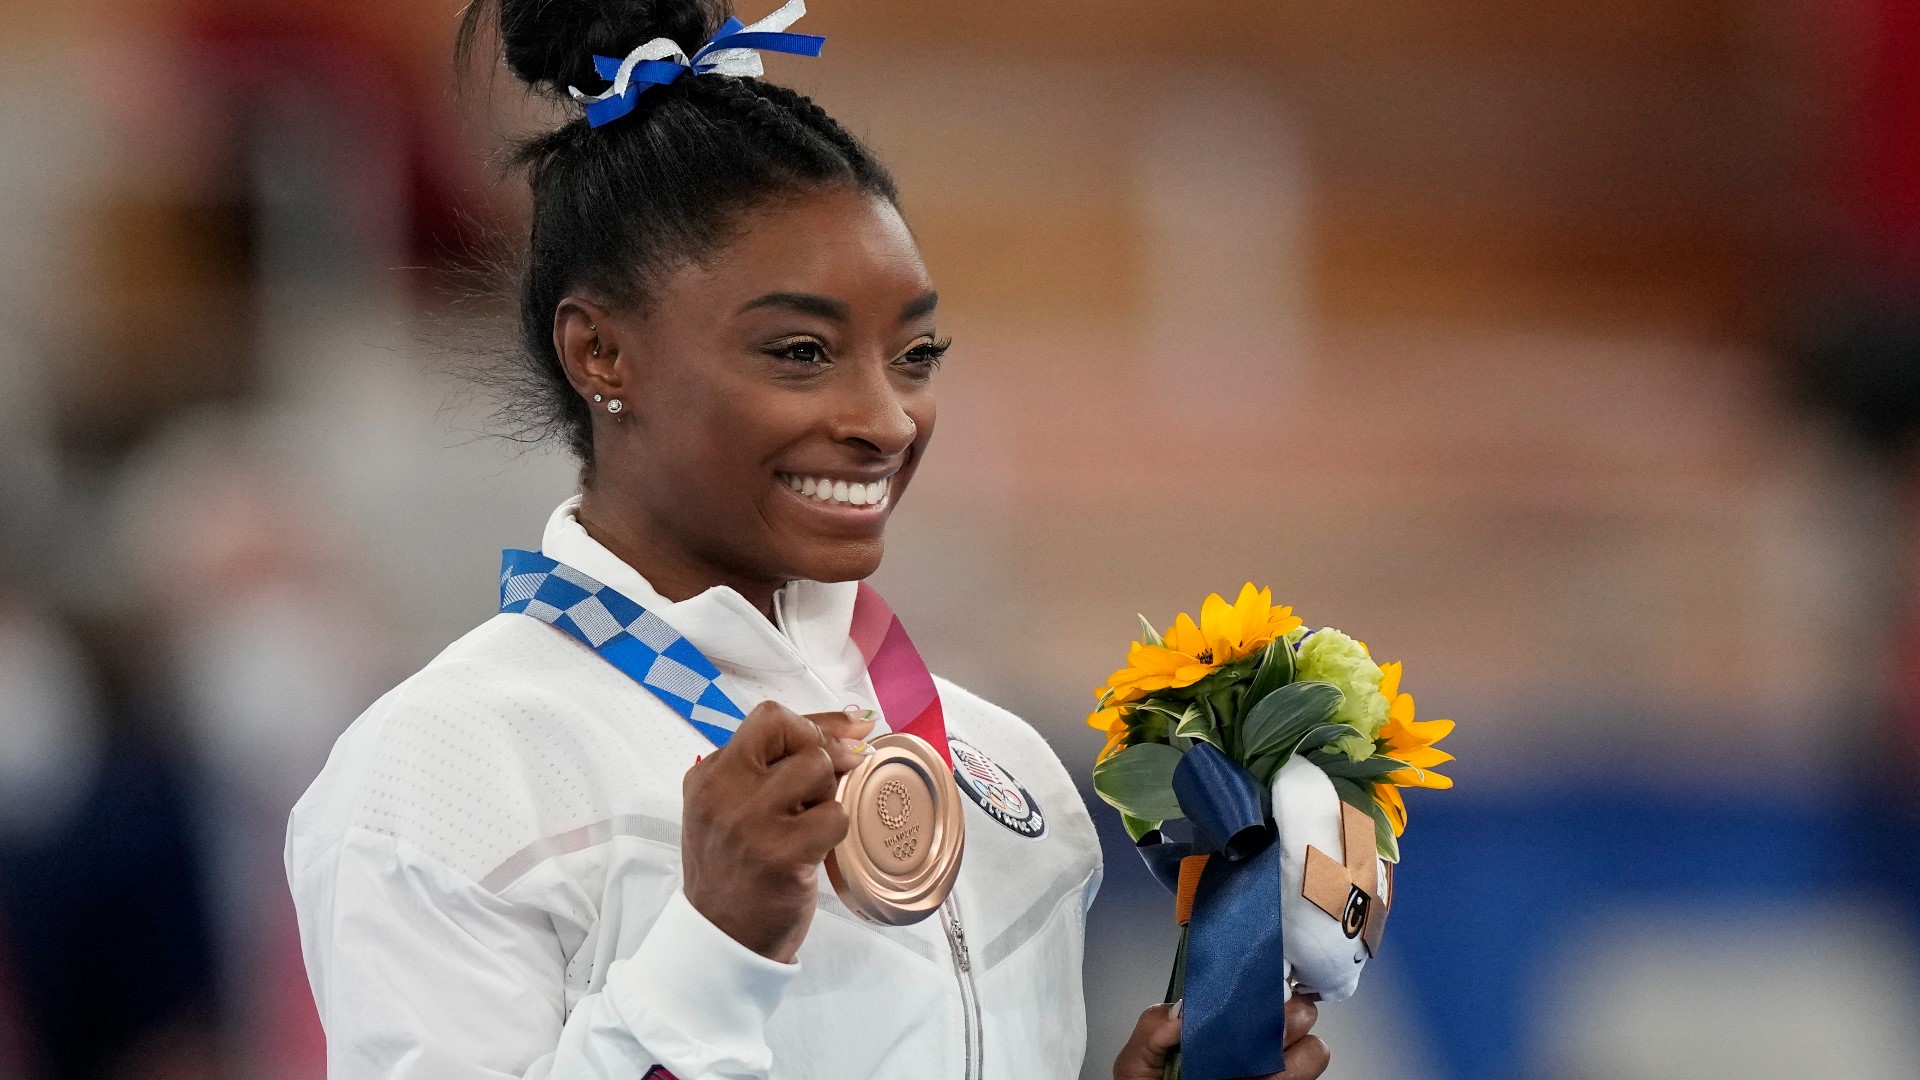 Simone Biles came back to competition to win her record-tying seventh Olympic medal.